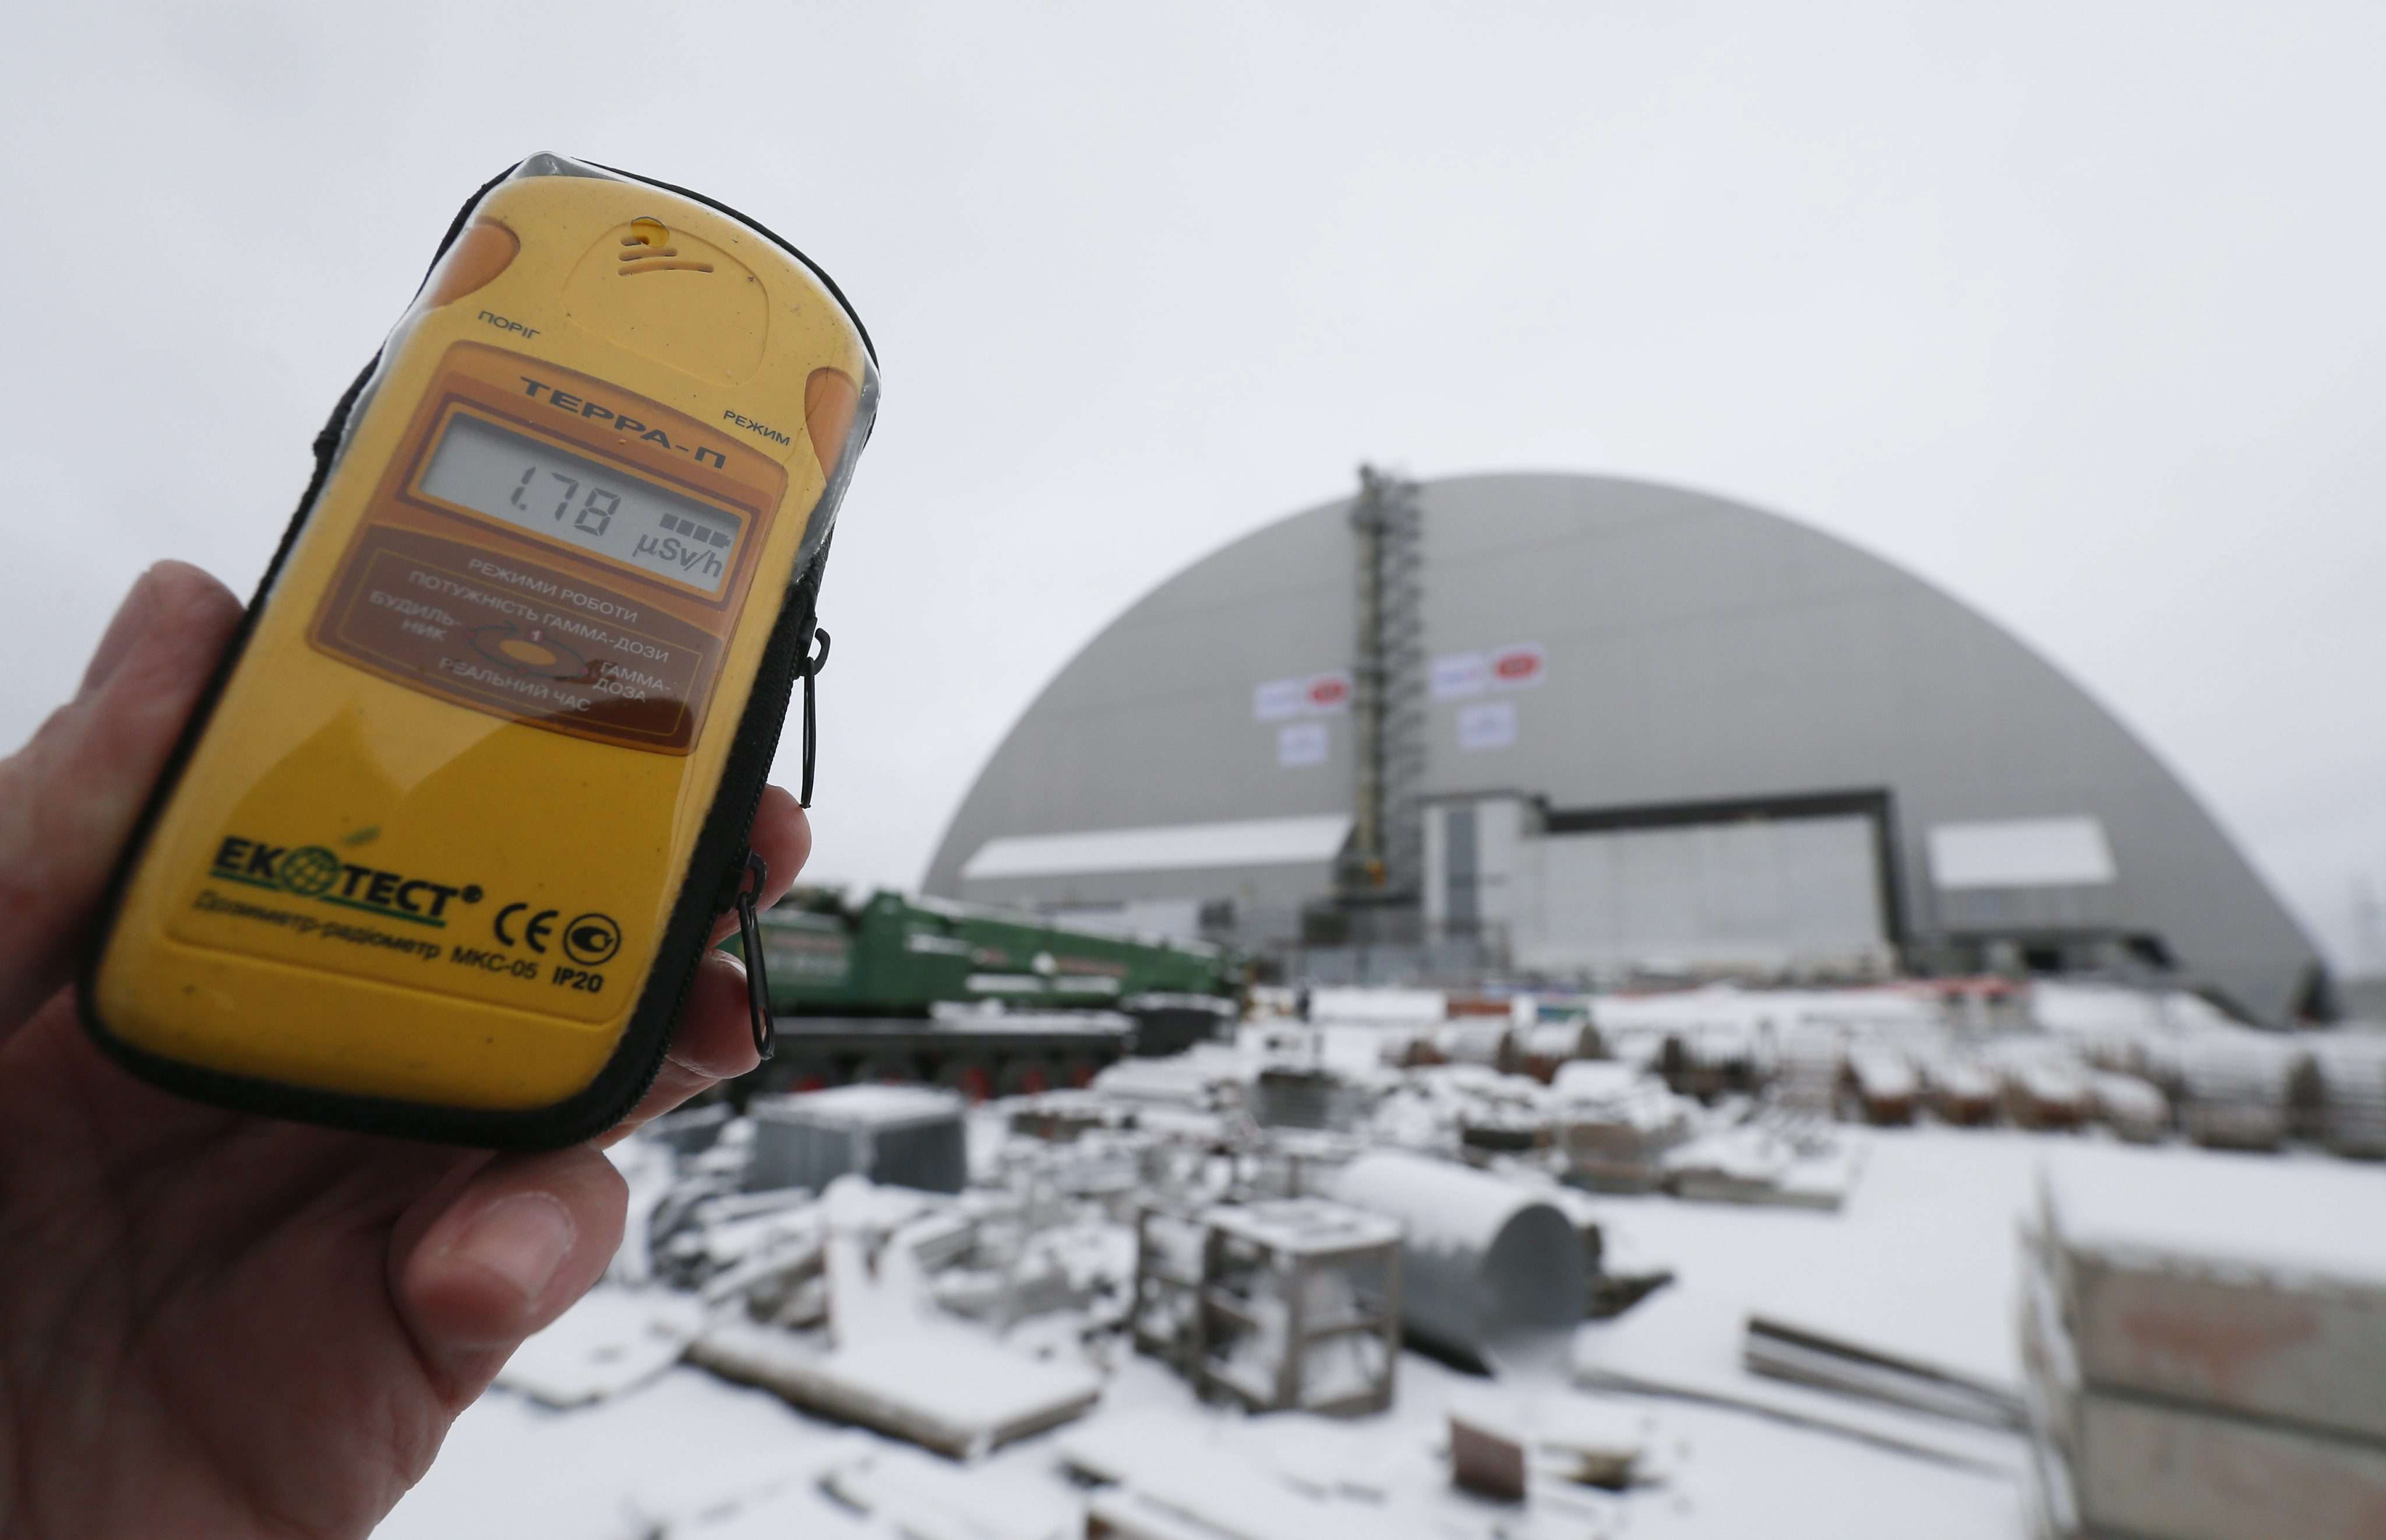 A dosimeter shows the radiation level near a new protective shelter placed over the remains of nuclear reactor Unit 4, at the Chernobyl nuclear power plant in Ukraine, on November 29. The explosion of Unit 4 in the early hours of April 26, 1986, is still regarded as the biggest accident in the history of nuclear power generation. Photo: EPA